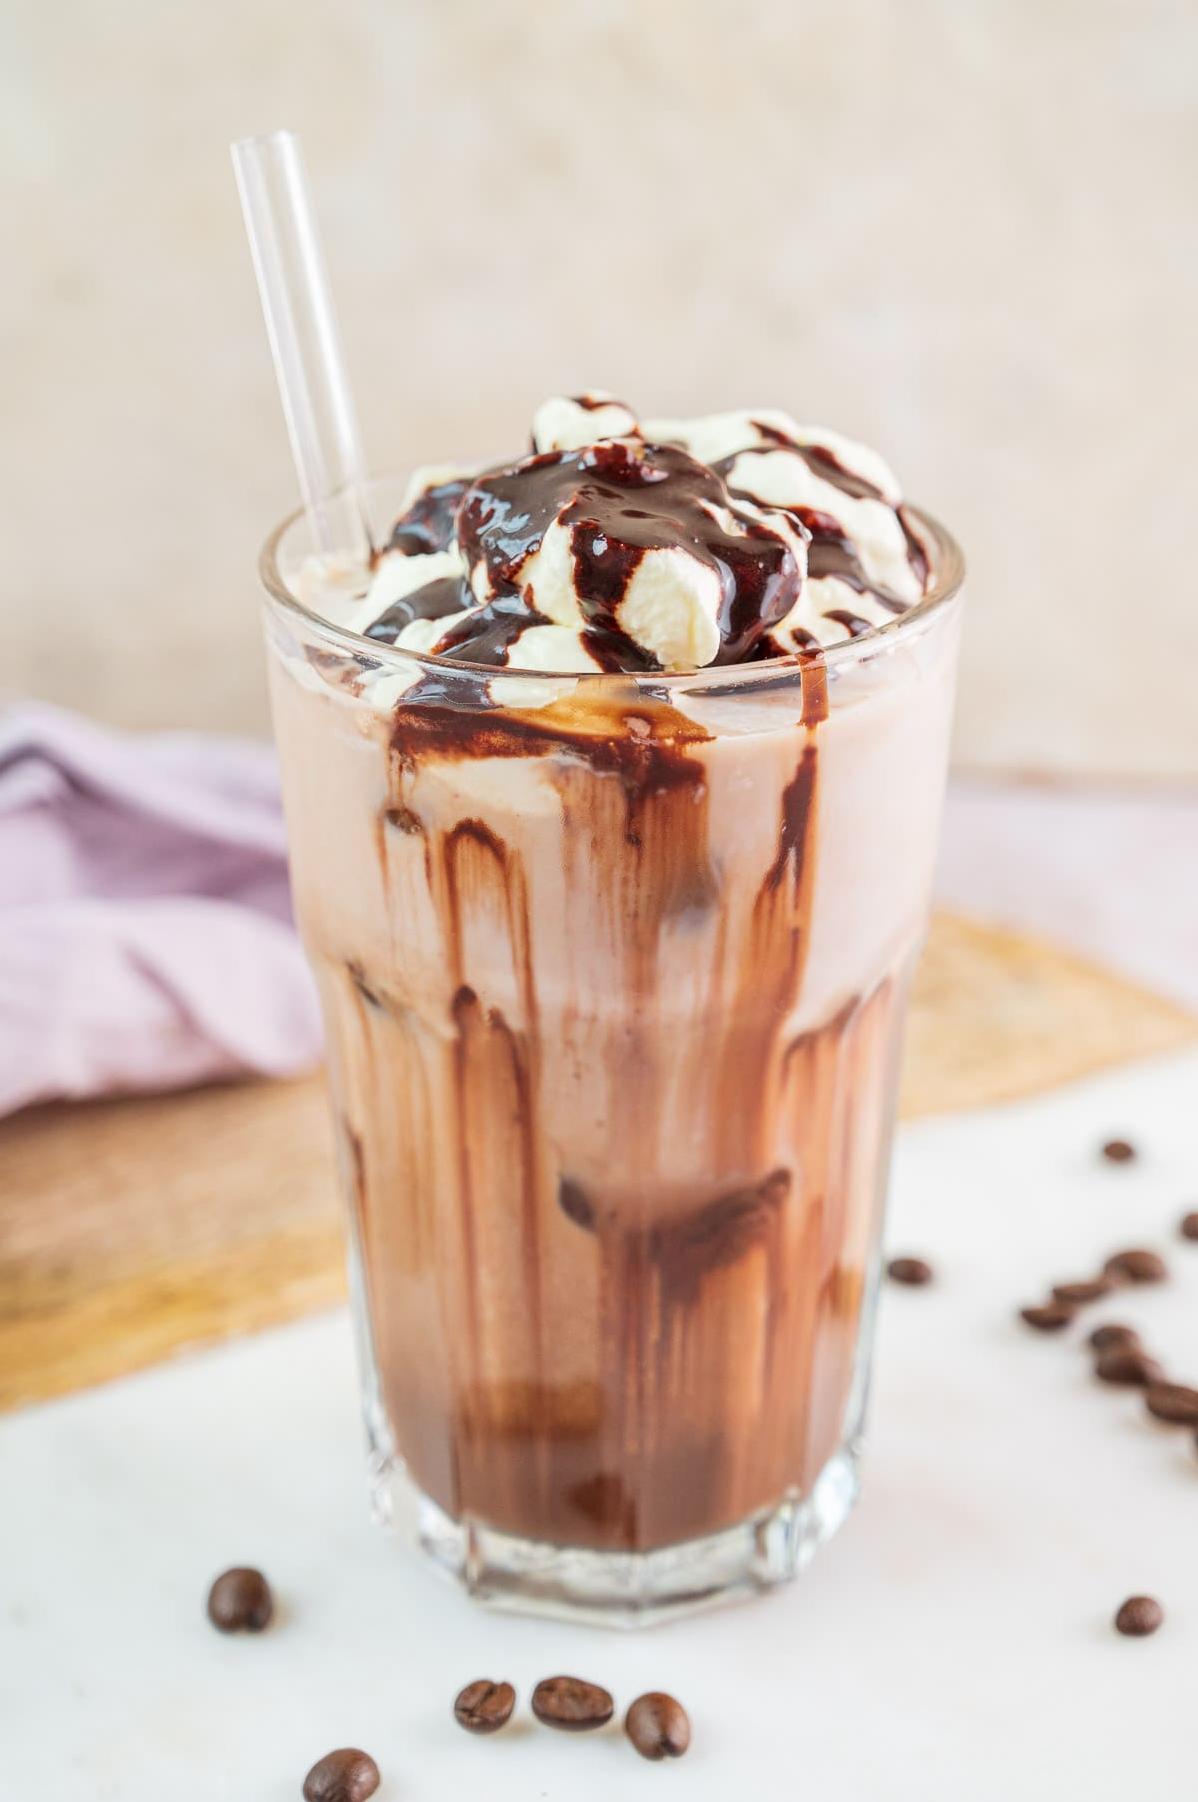  This tantalizing drink is sure to satisfy your caffeine and chocolate cravings